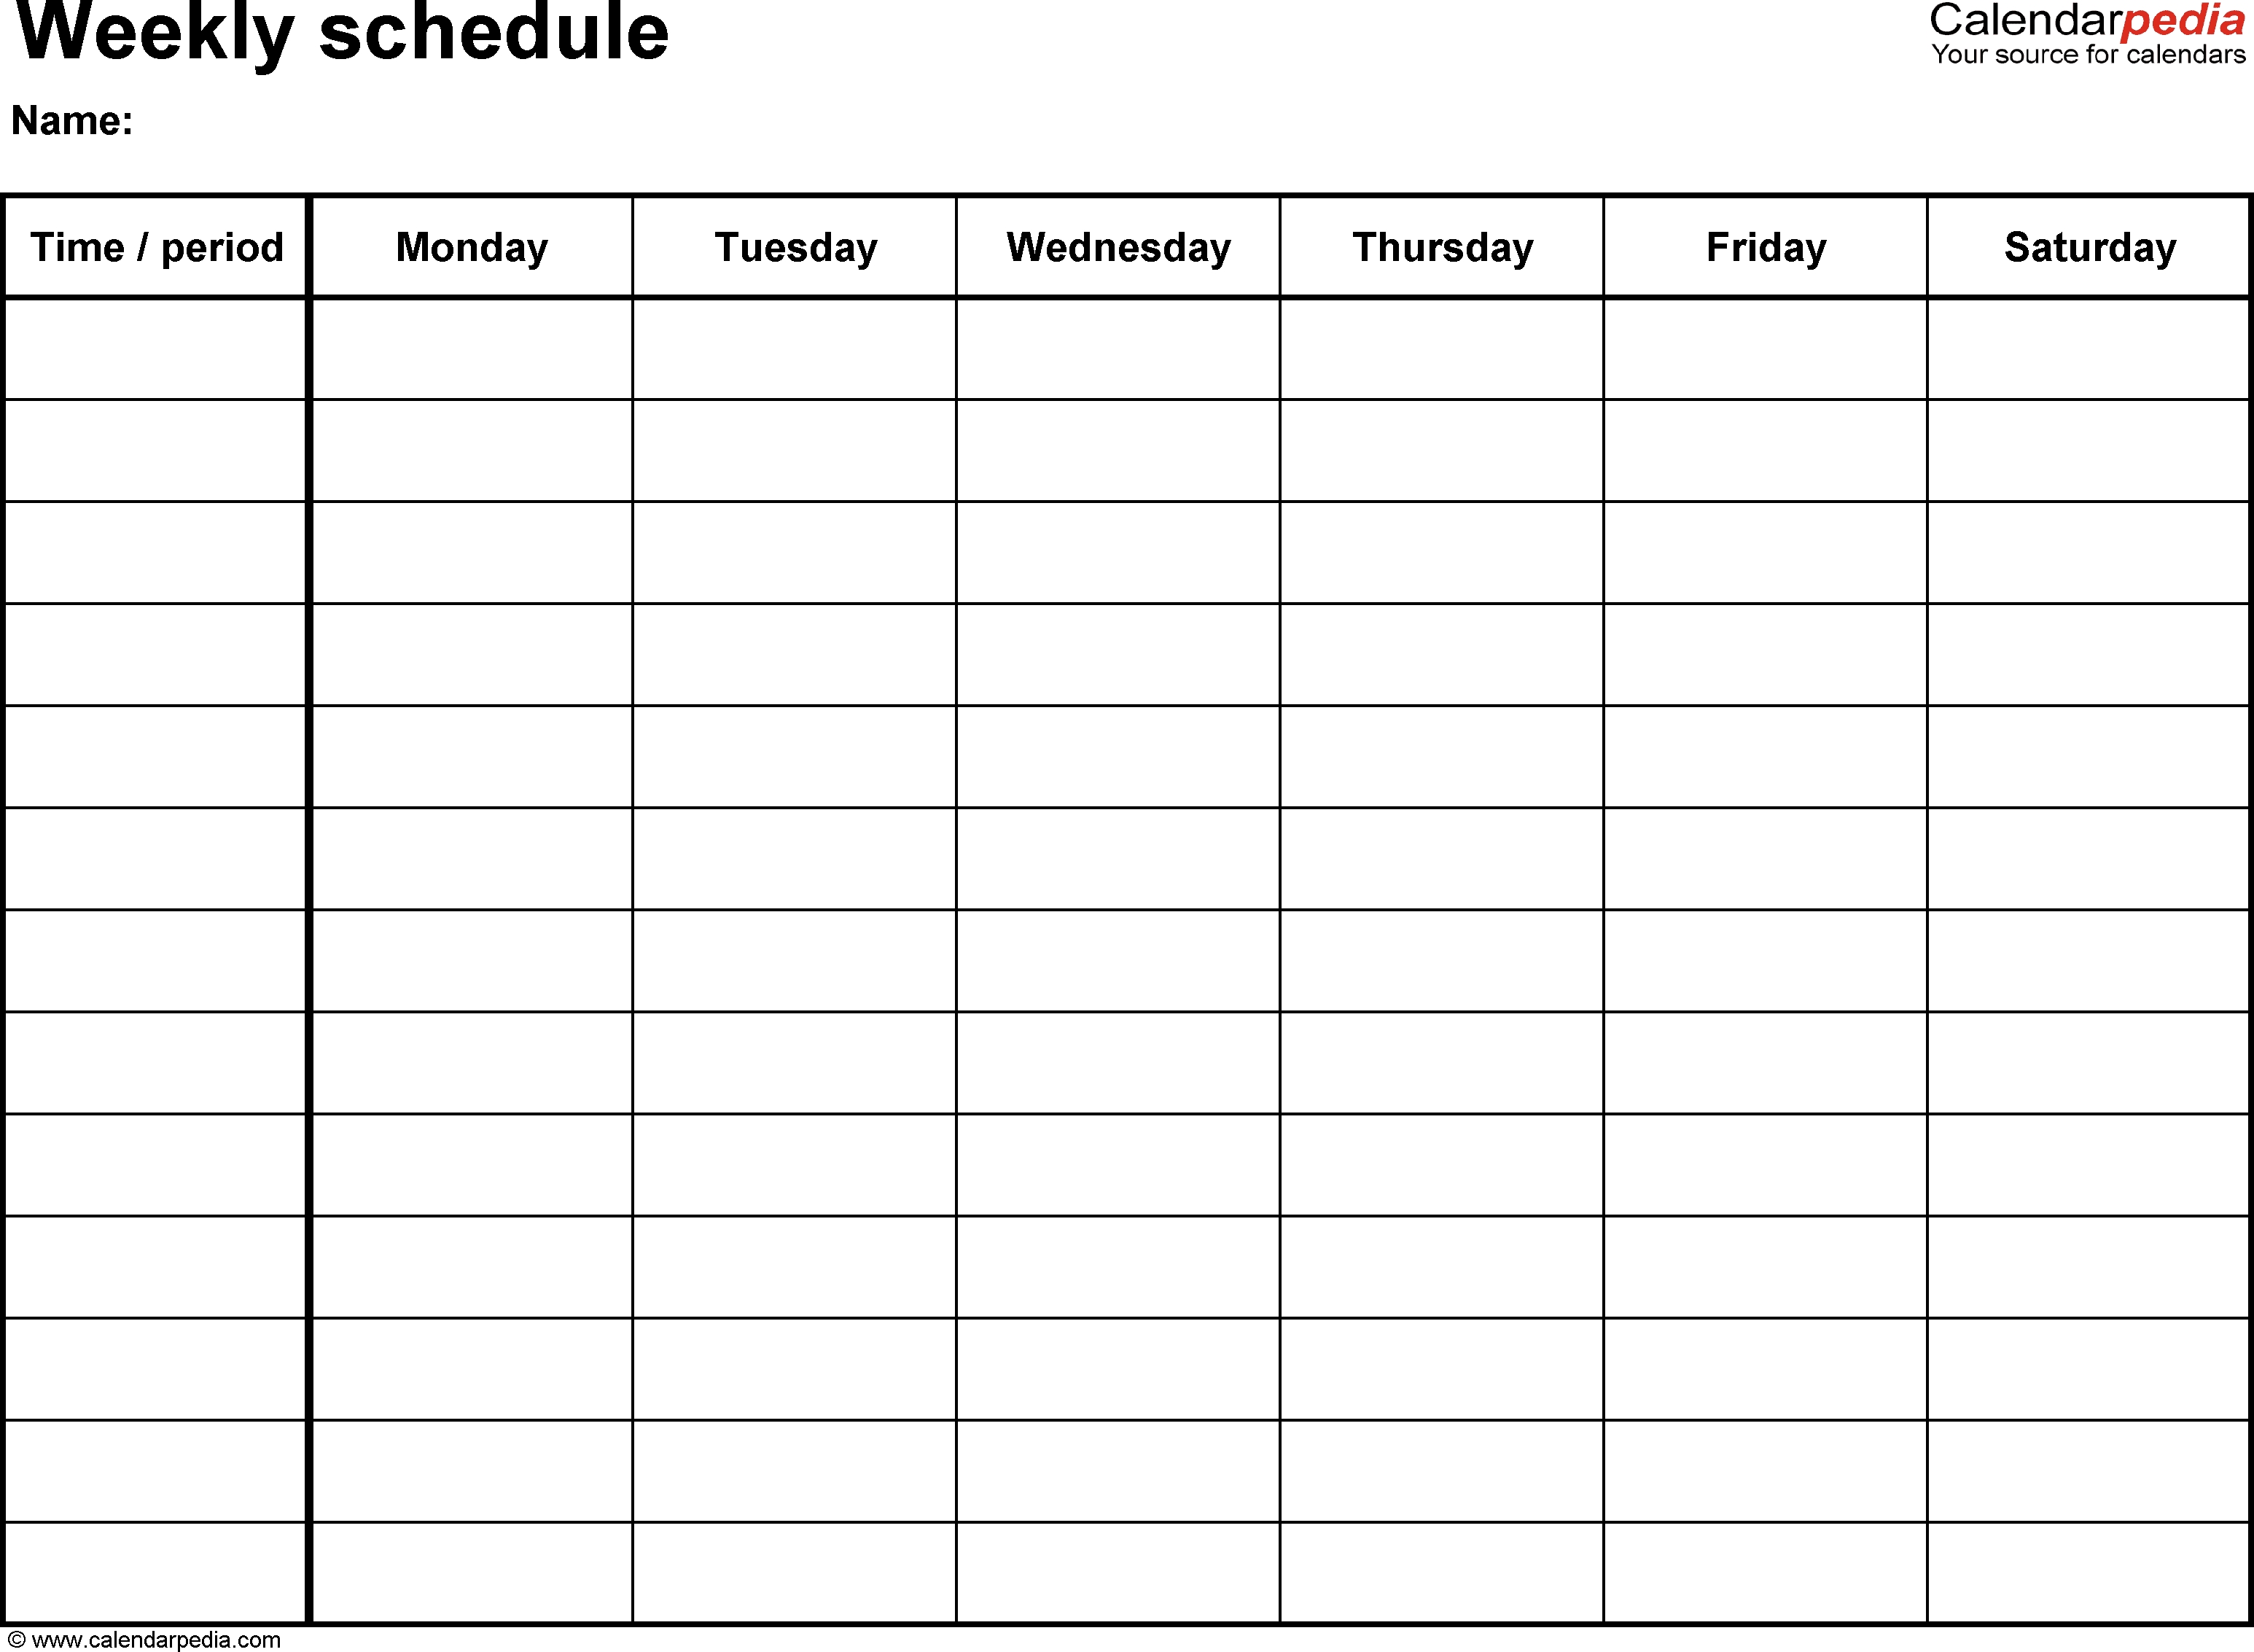 Free Weekly Schedule Templates For Word - 18 Templates with Blank Monday Through Friday Schedule